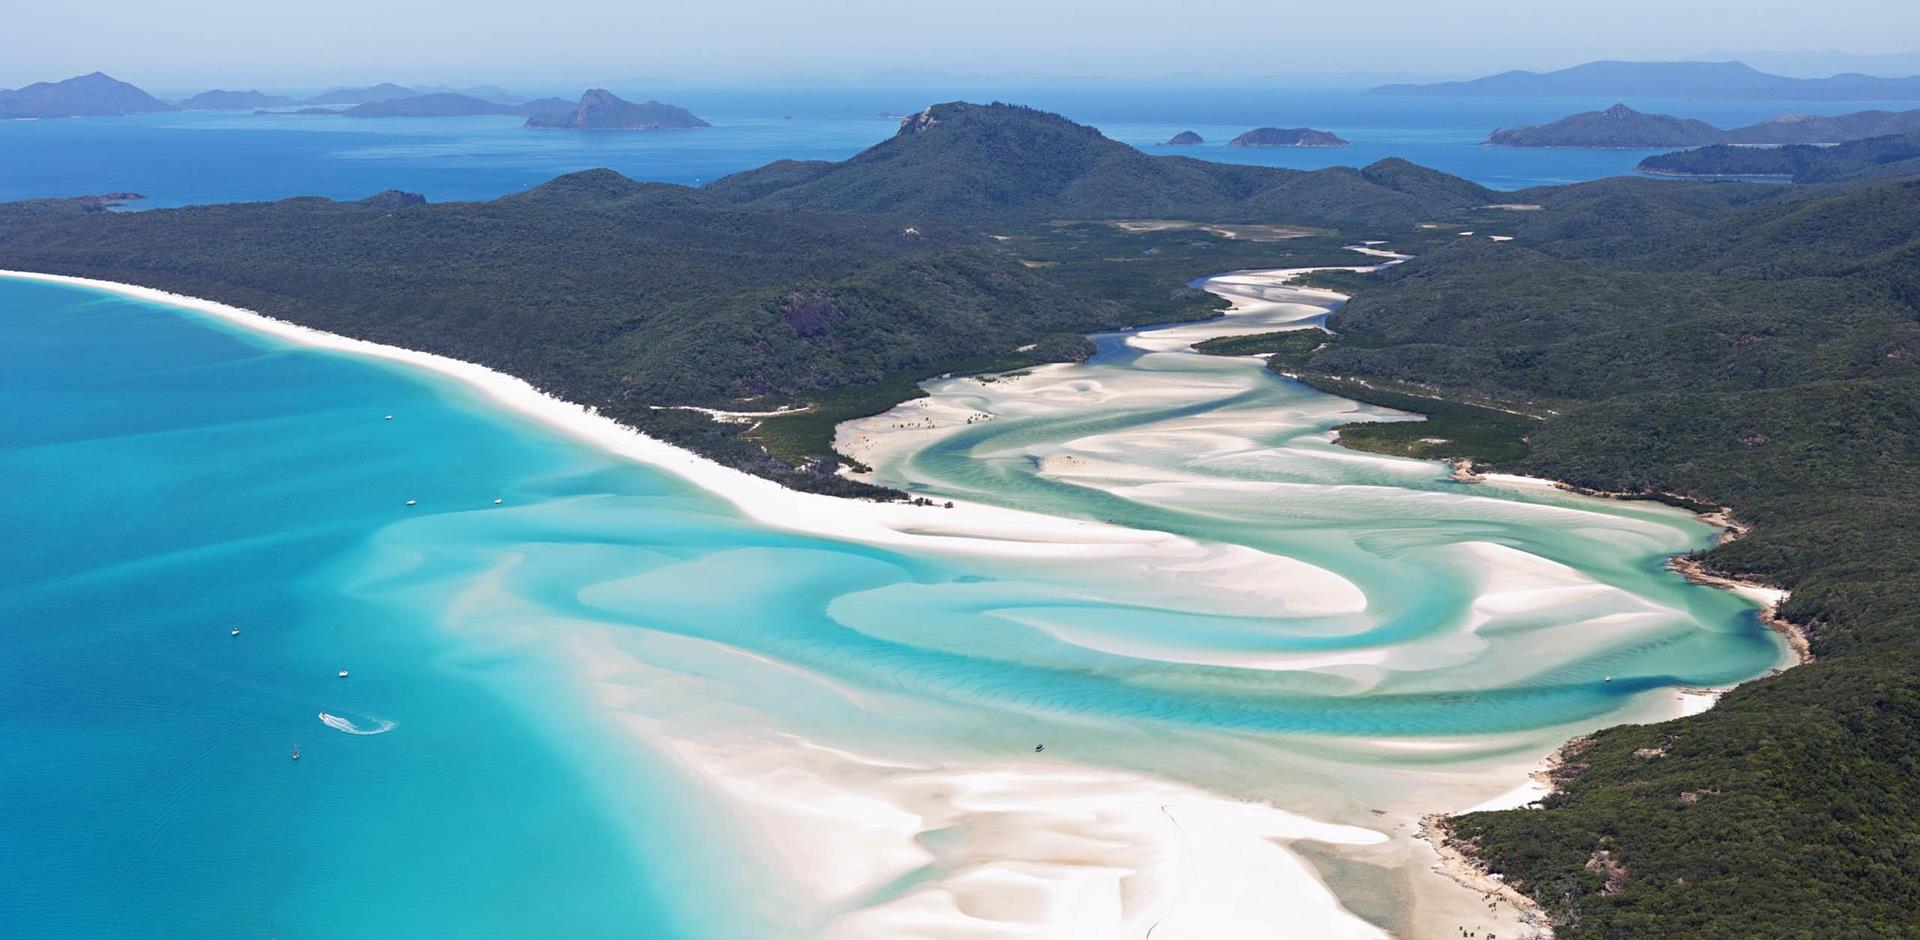 Enjoy a wonderful holiday to Queensland's Tropical Islands with A&K